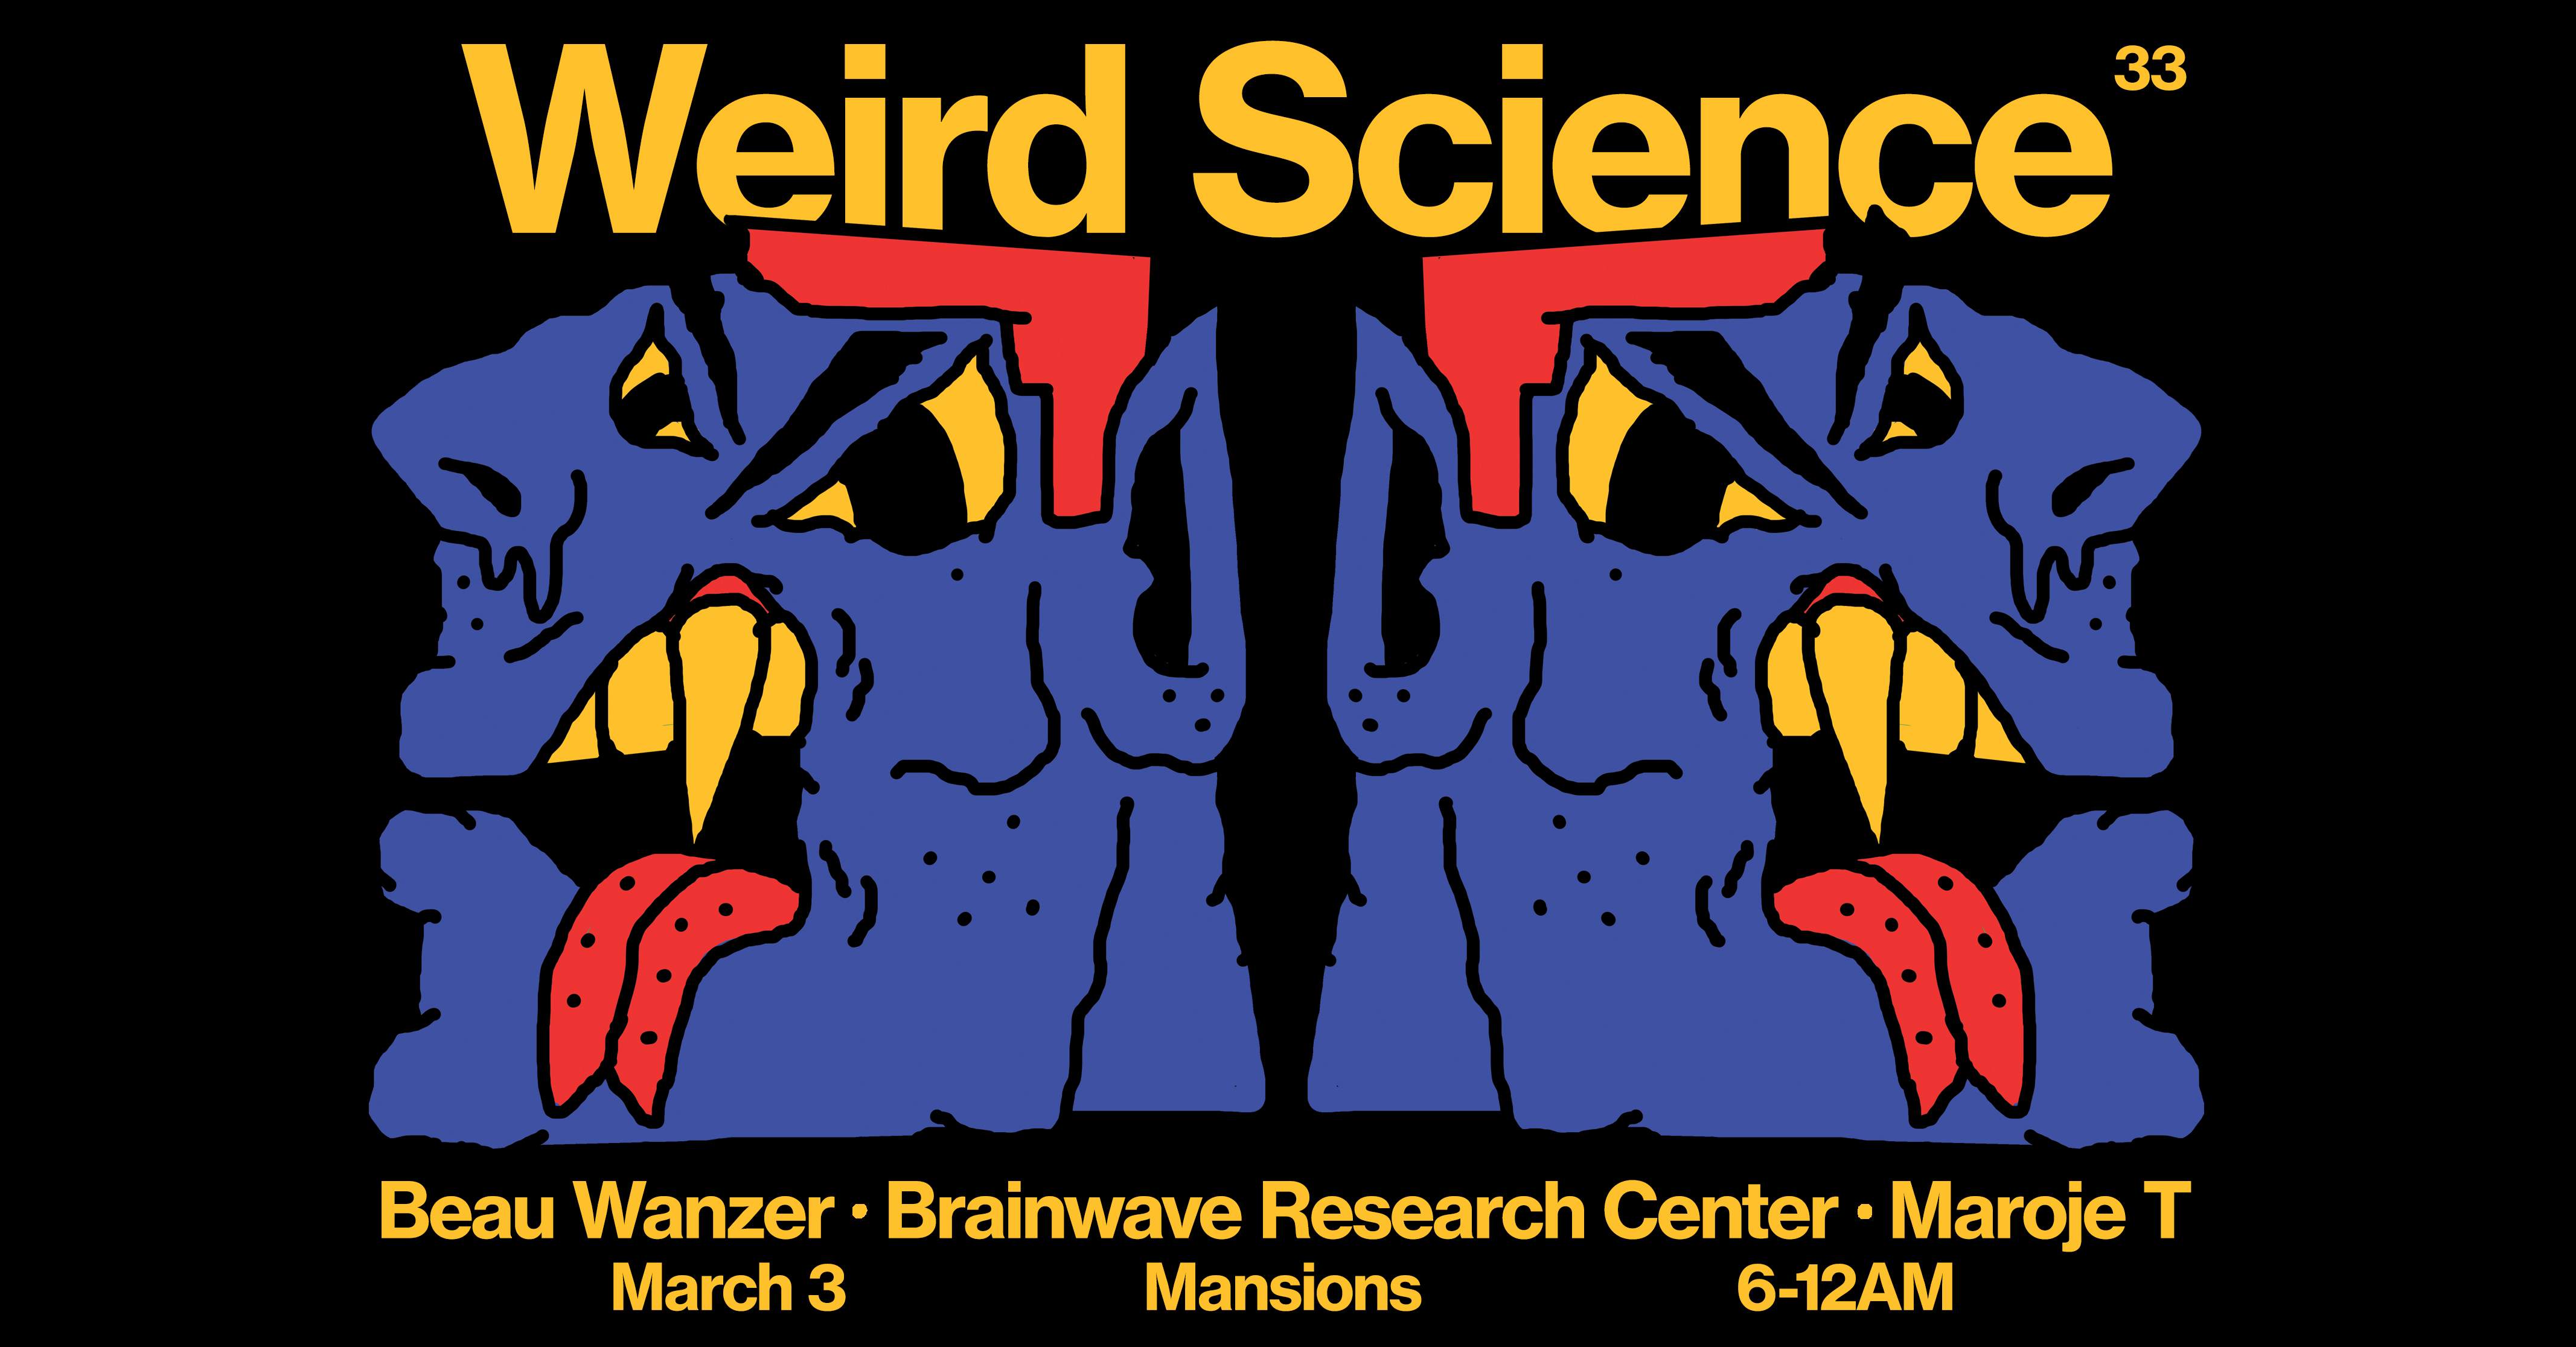 Weird Science with Beau Wanzer and Brainwave Research Center - Página frontal